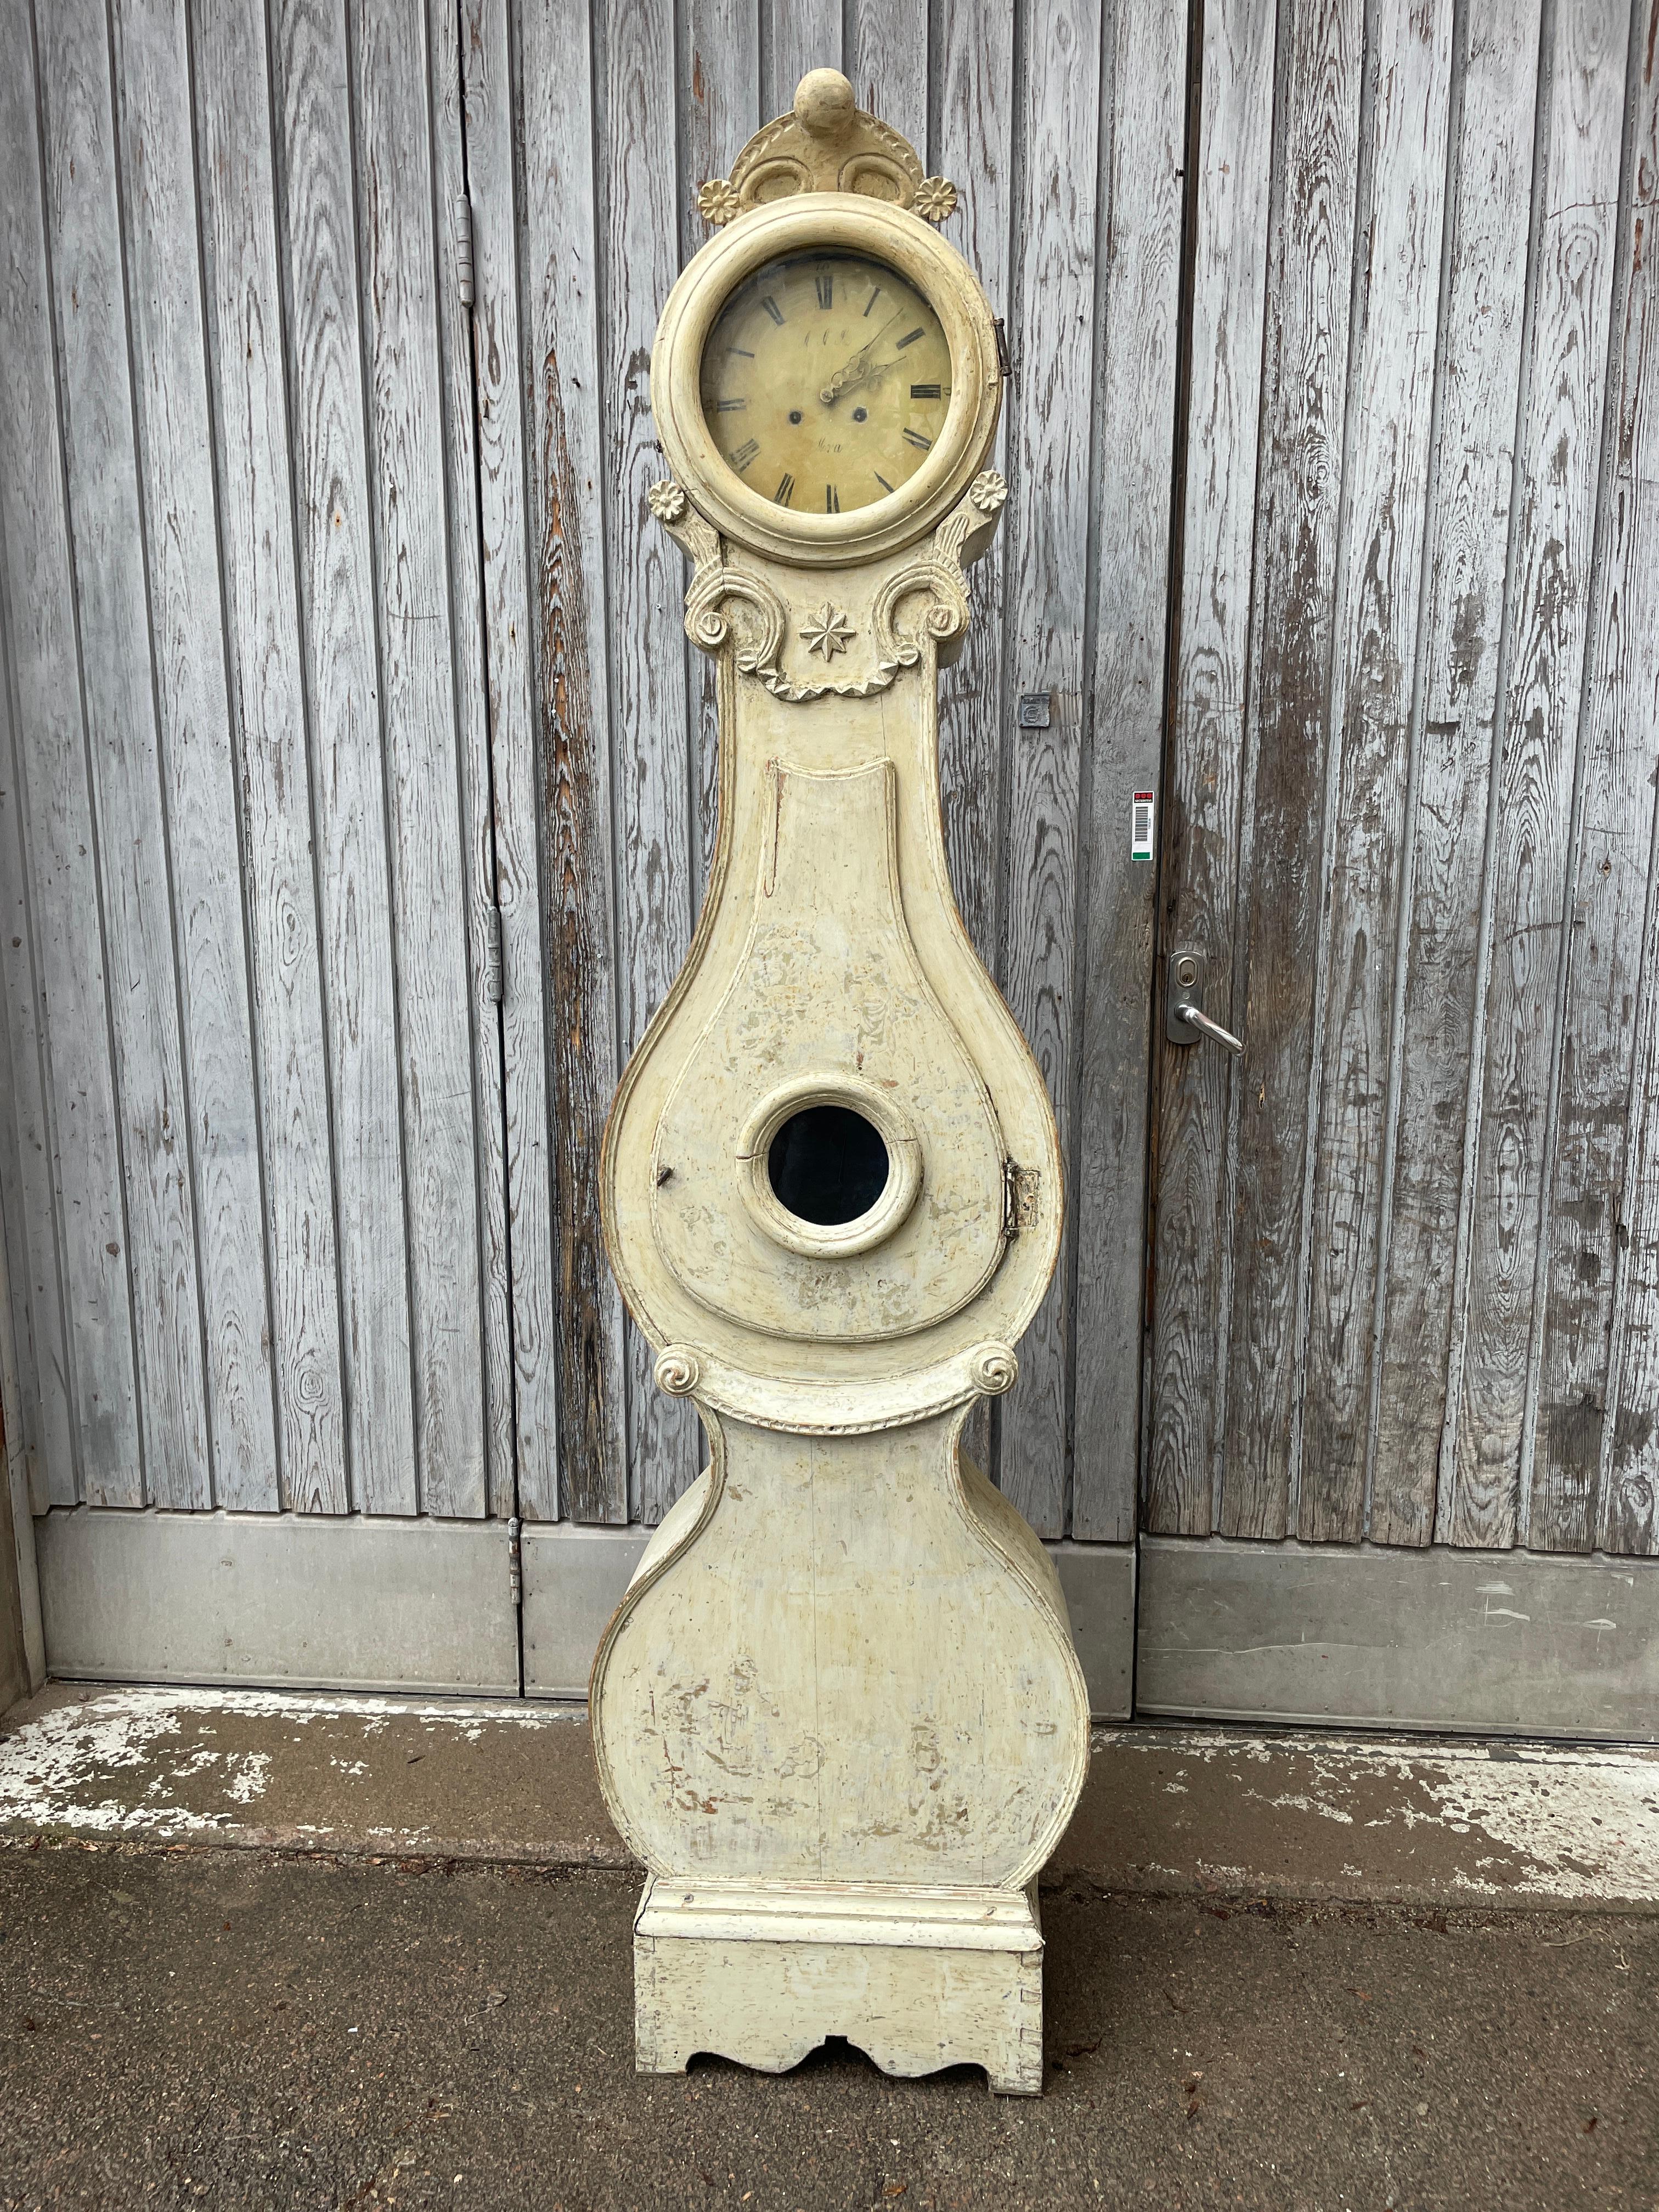 A Swedish antique Mora clock dating with its original paint.
The original mechanism, pendulum and weights are included. We do not guarantee functionality. This Grand-father clock has carefully been 